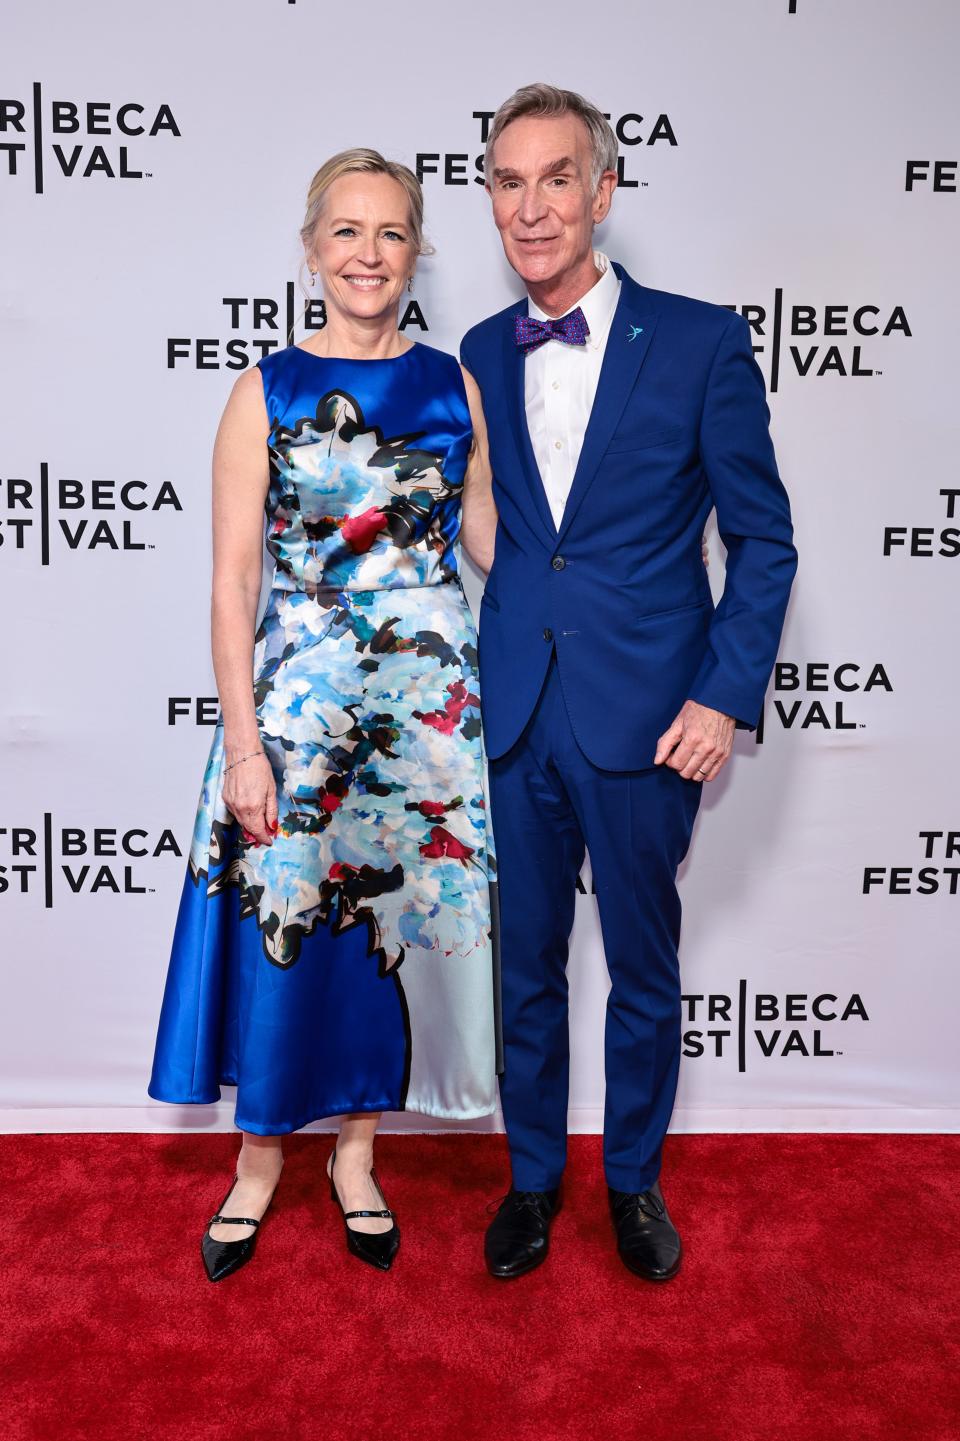 Liza Mundy, left, and husband Bill Nye at the Tribeca Festival premiere of "The End Is Nye" in New York in June.